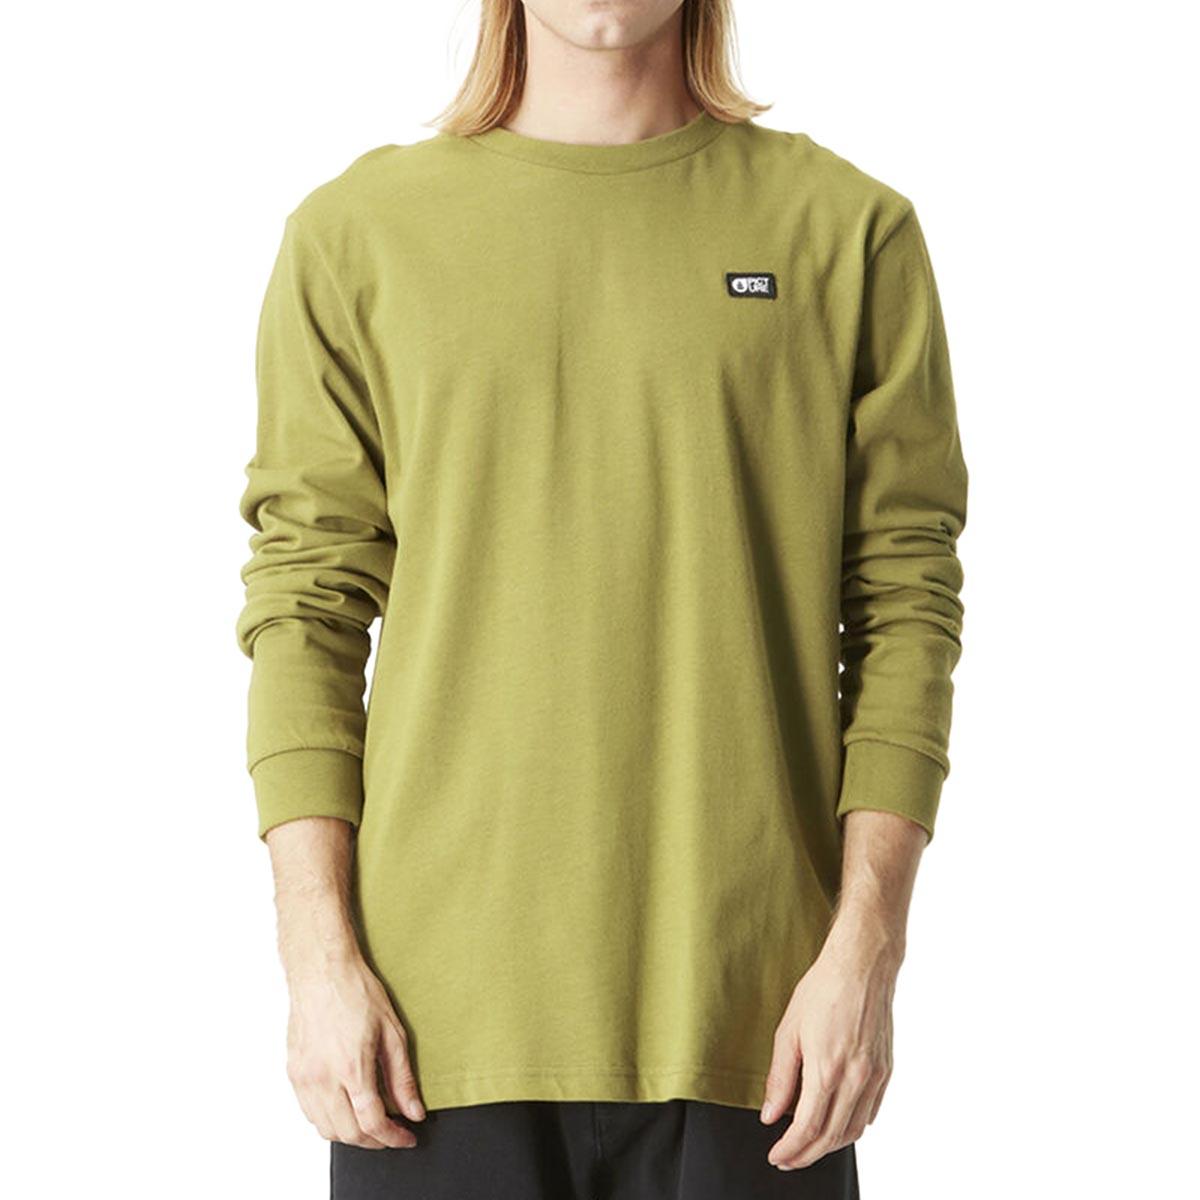 PICTURE - SICAN LONG SLEEVE SHIRT